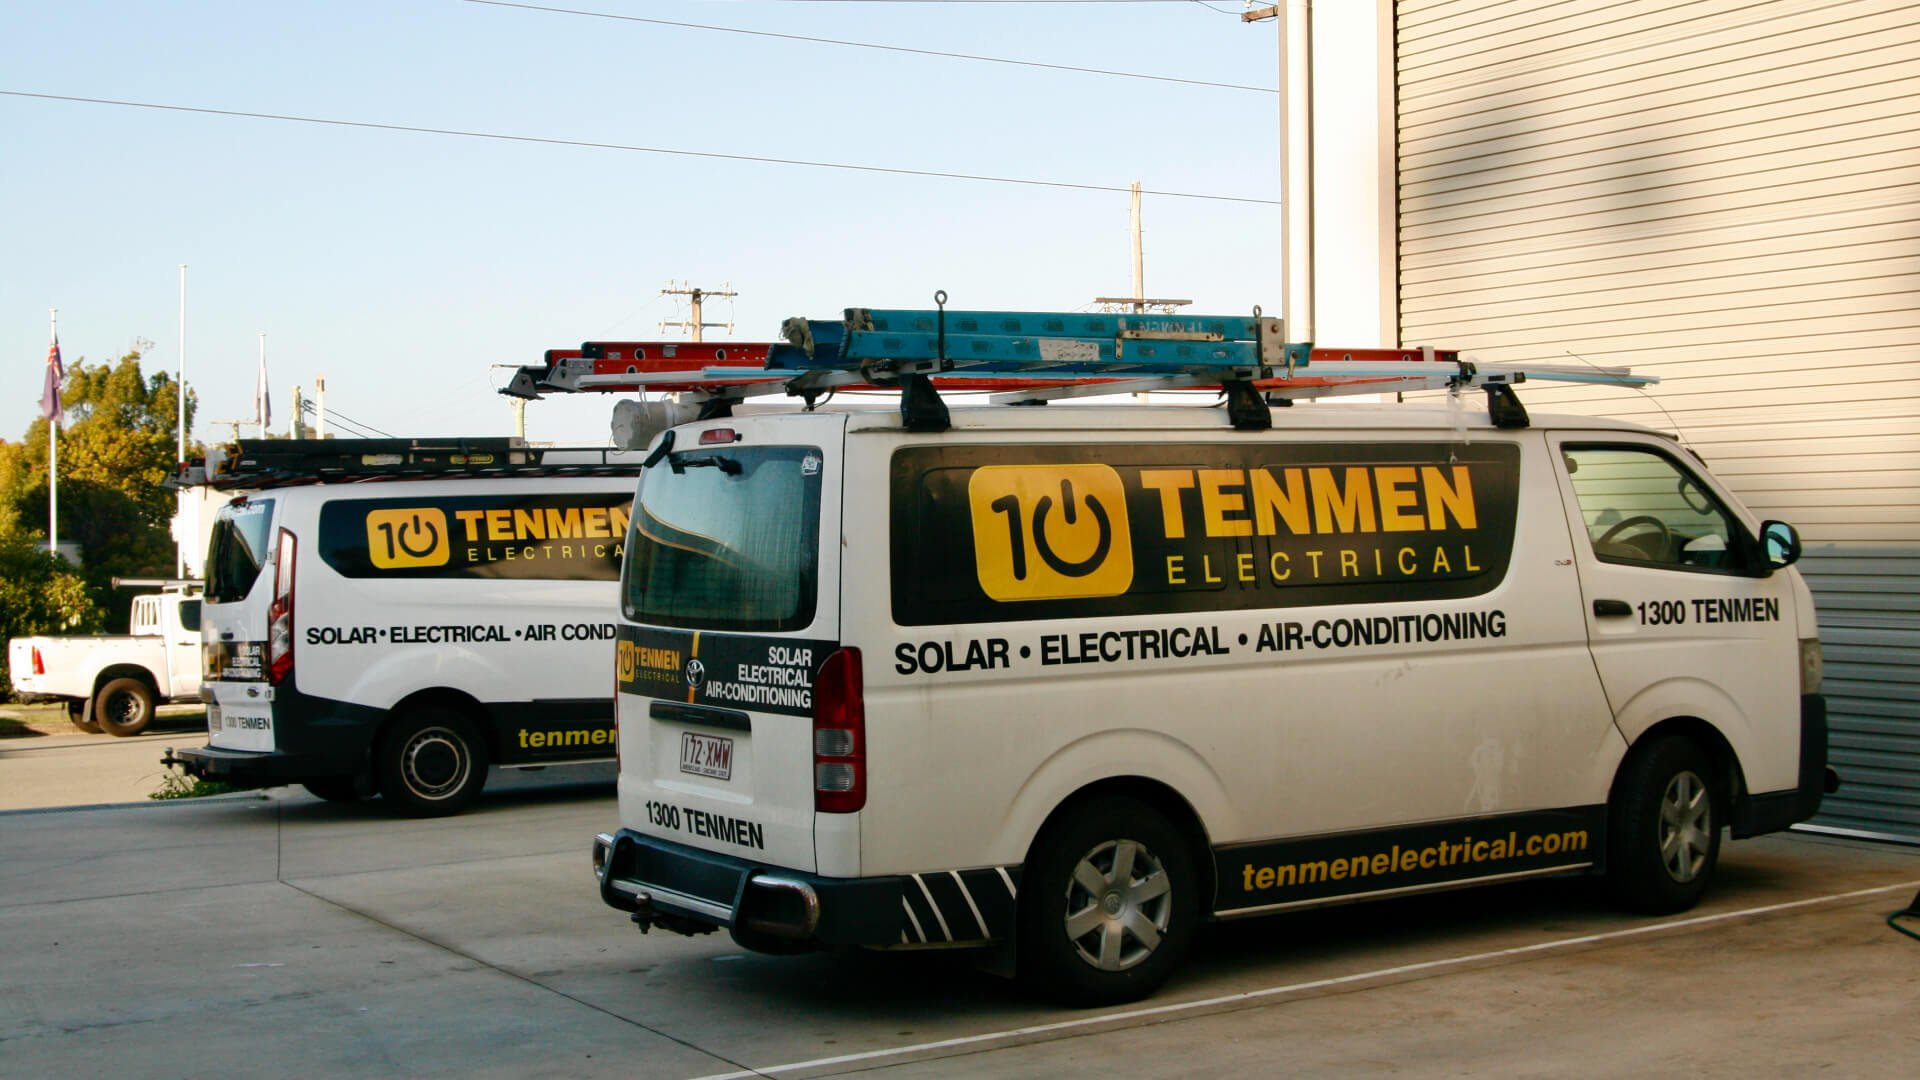 Two Tenmen Electrical vans loaded with air conditioning supply and parked in front of a building on the Sunshine Coast